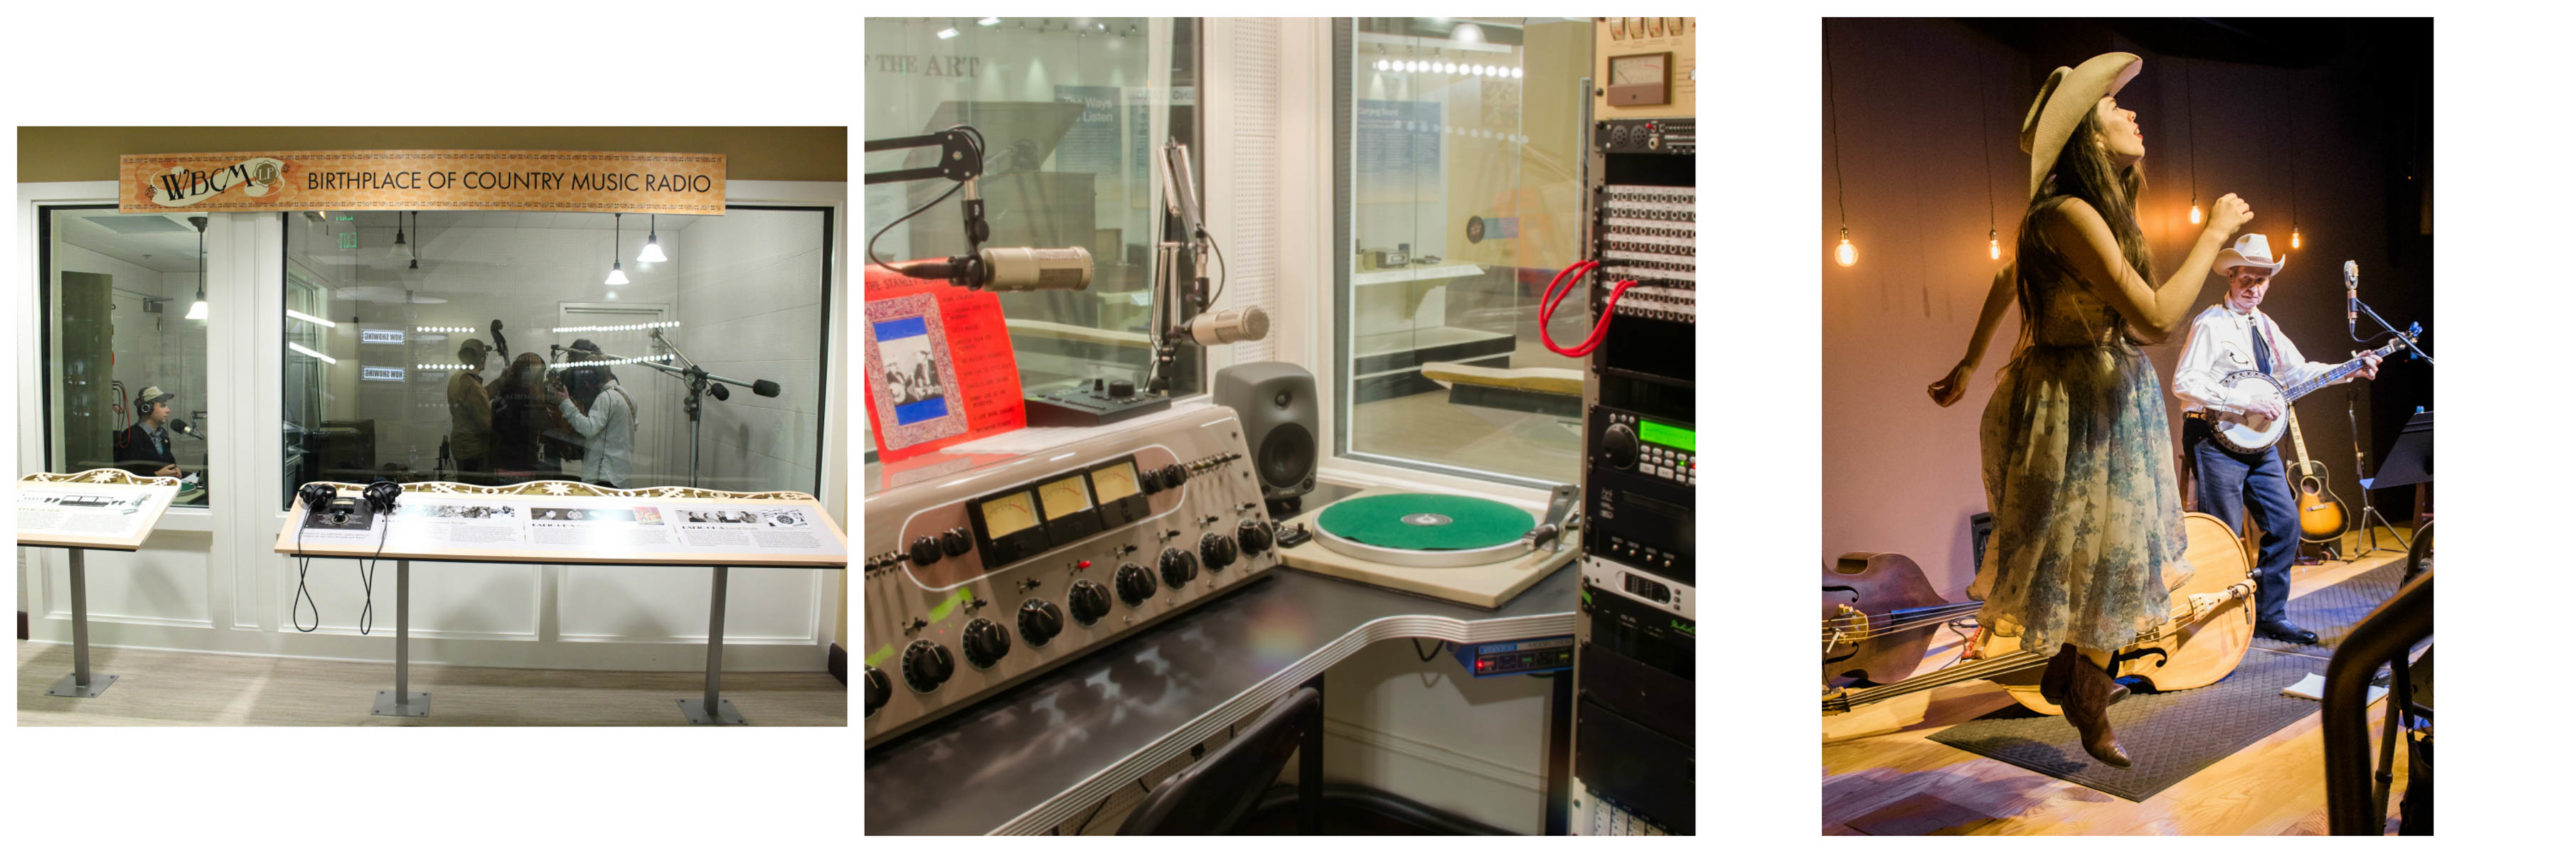 Left: A view of the radio station from outside the booths showing a DJ in the smaller room to the left and a band recording live in the larger space to the right; center: A view of the console, turntable, and other equipment in the DJ booth; Right: A musician on banjo plays while Martha Spencer flatfoots live on the Farm and Fun Time stage.